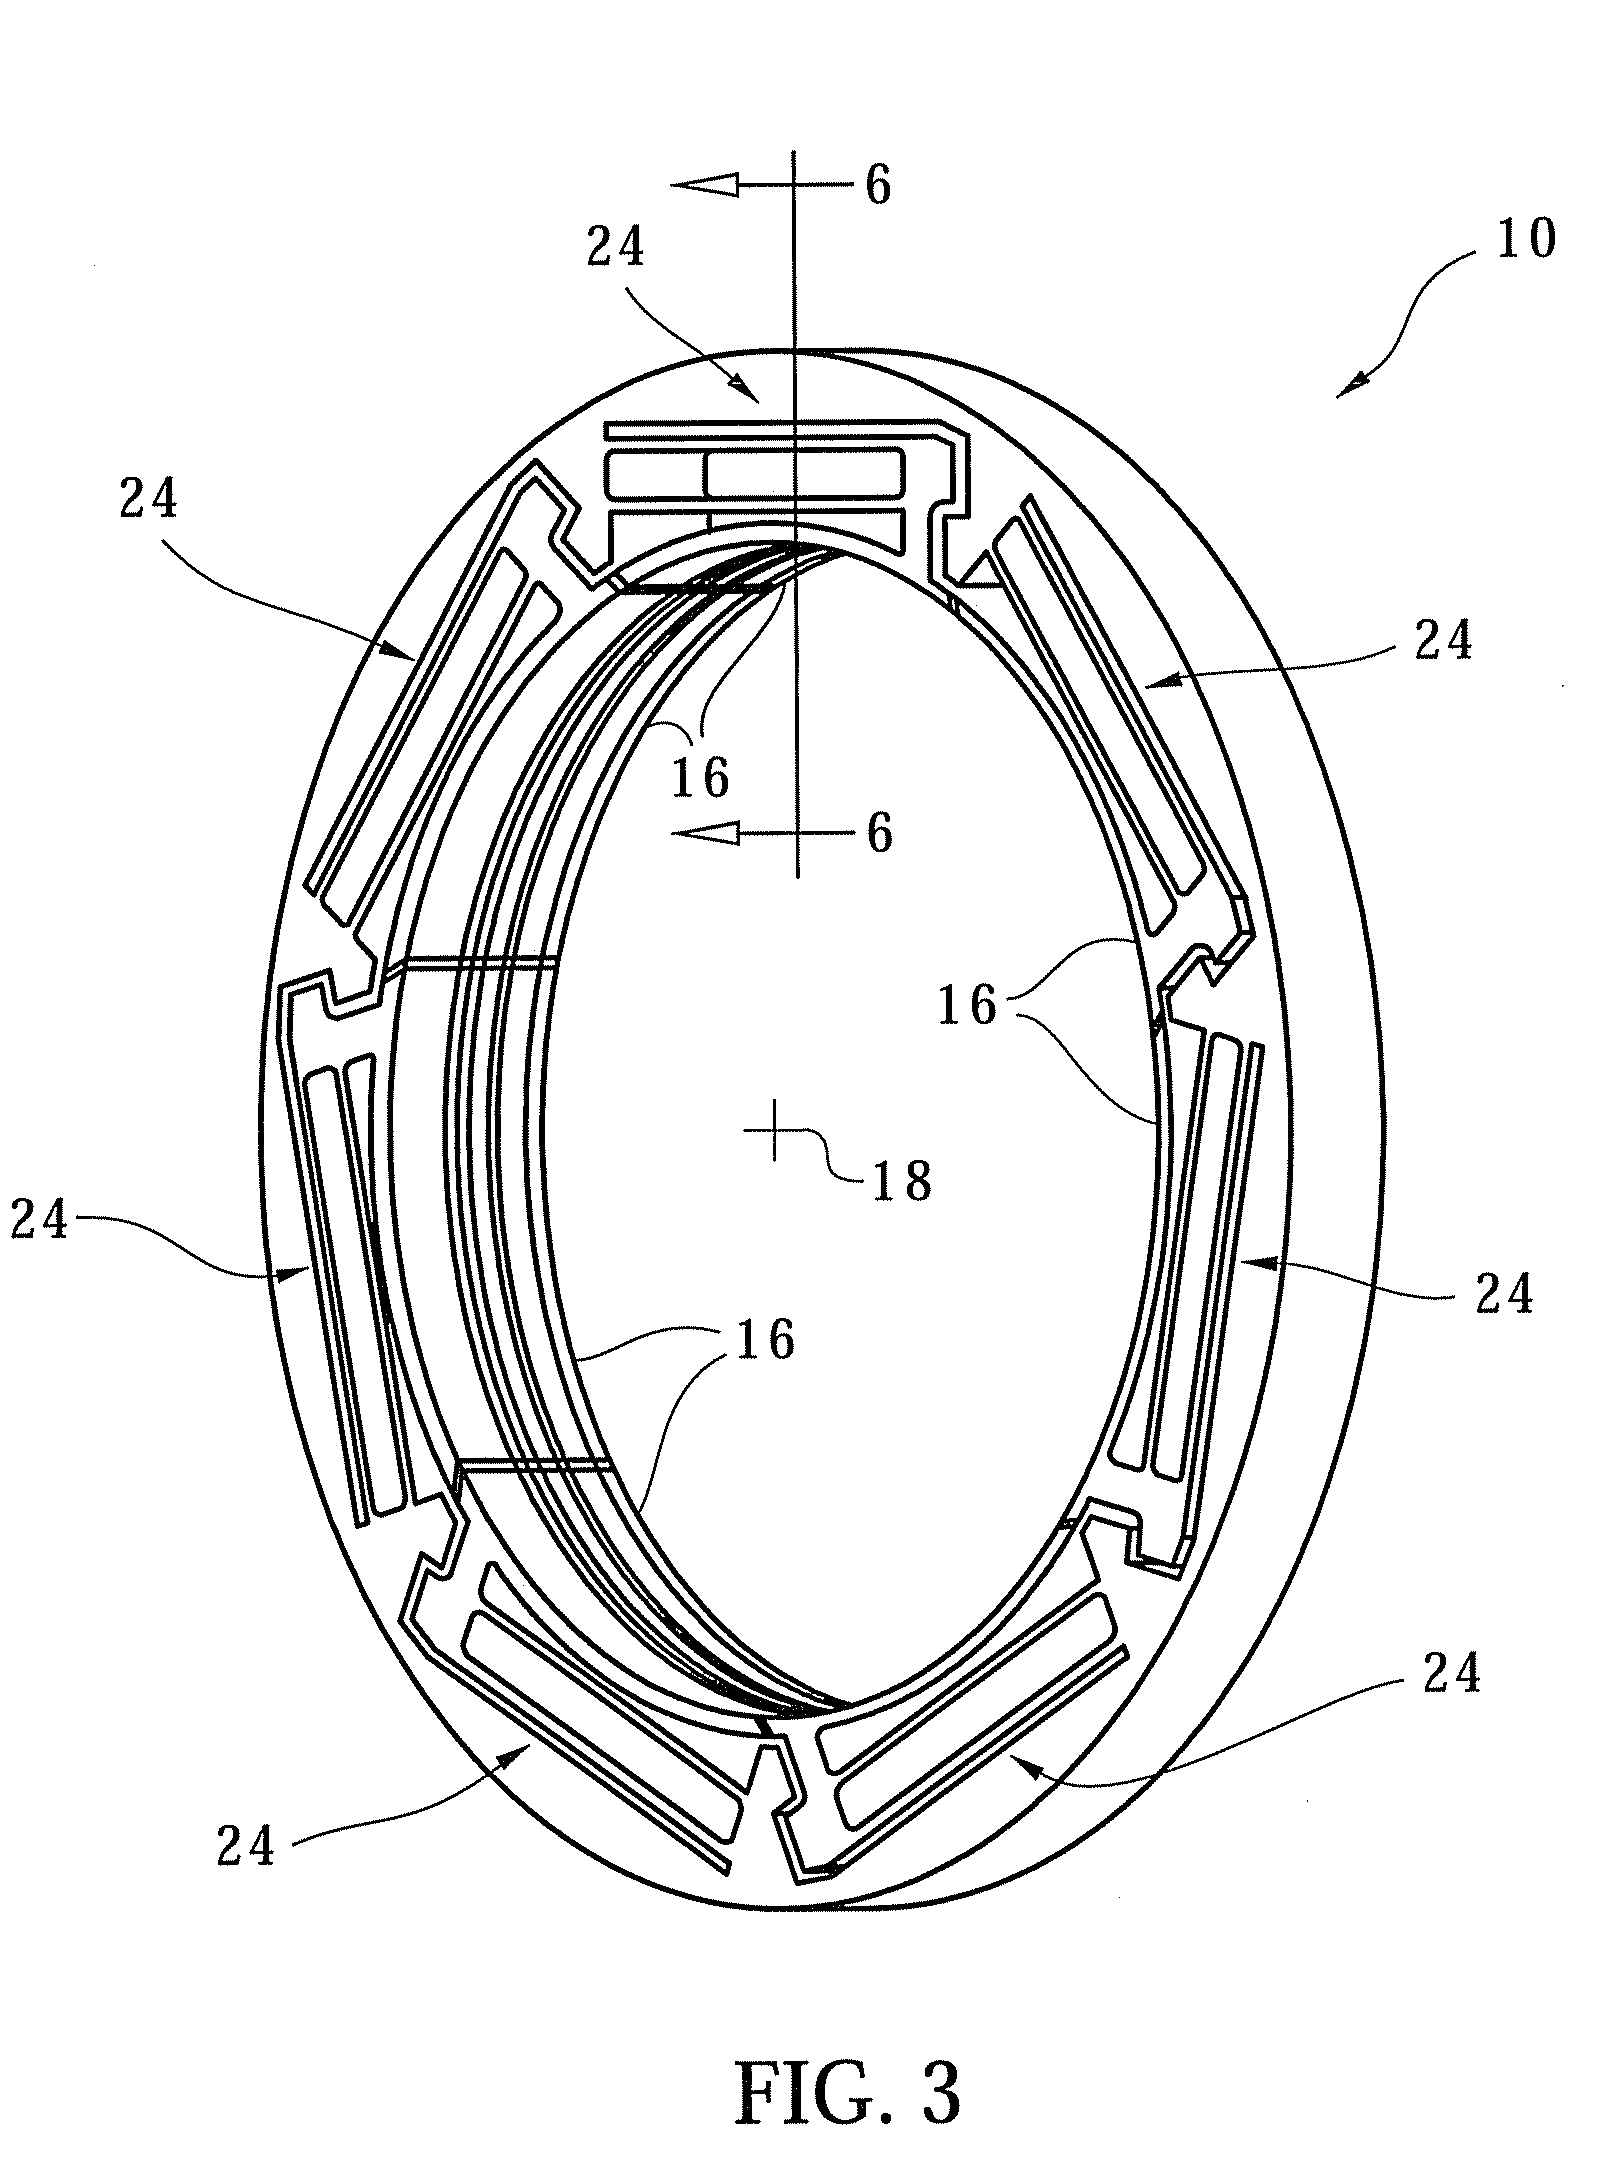 Non-contact seal for a gas turbine engine